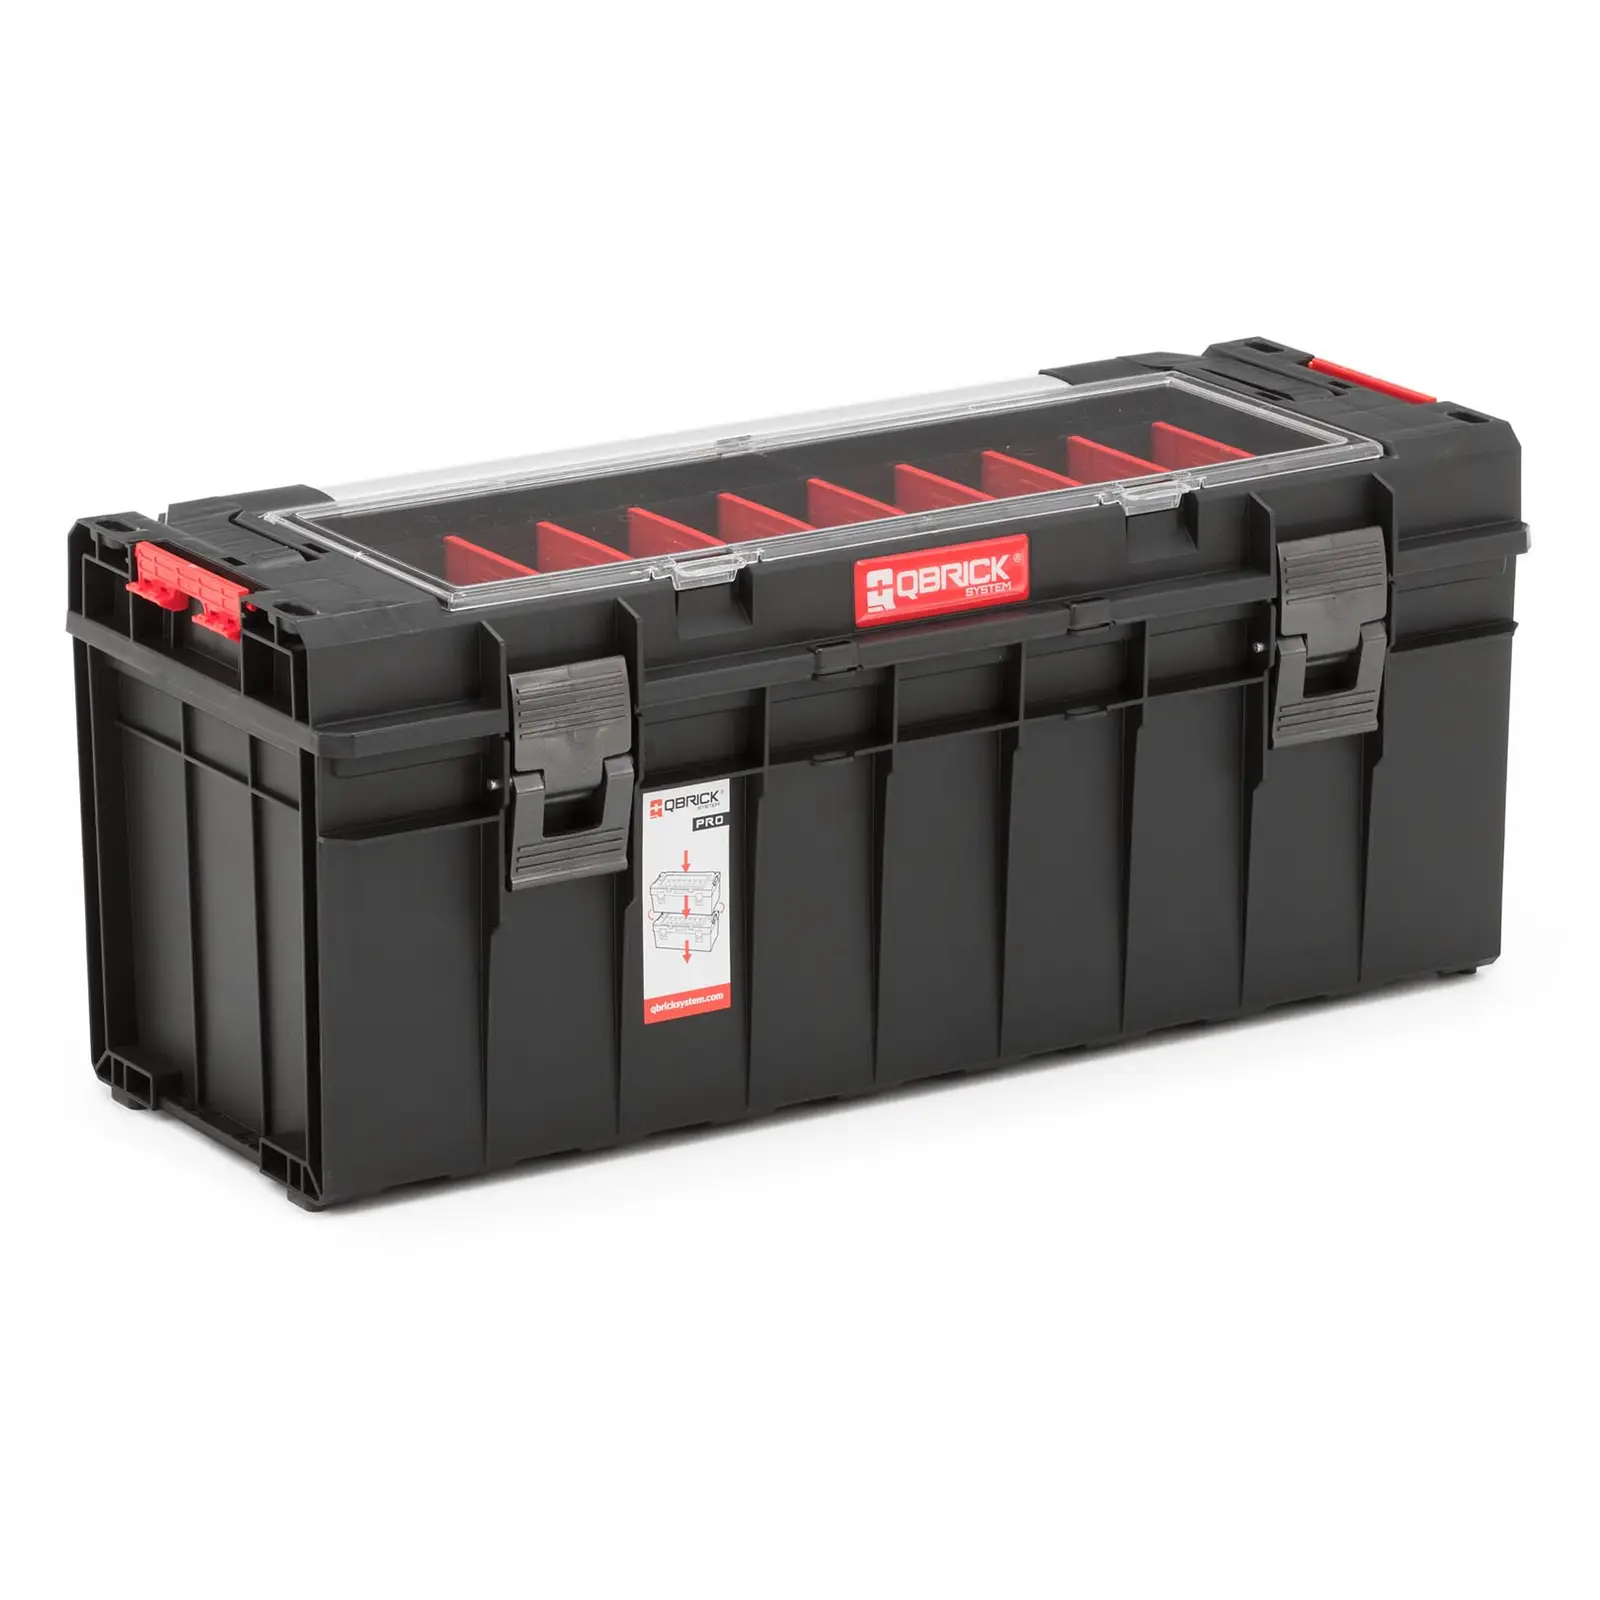 Factory second Toolbox - Pro 700 - Organiser